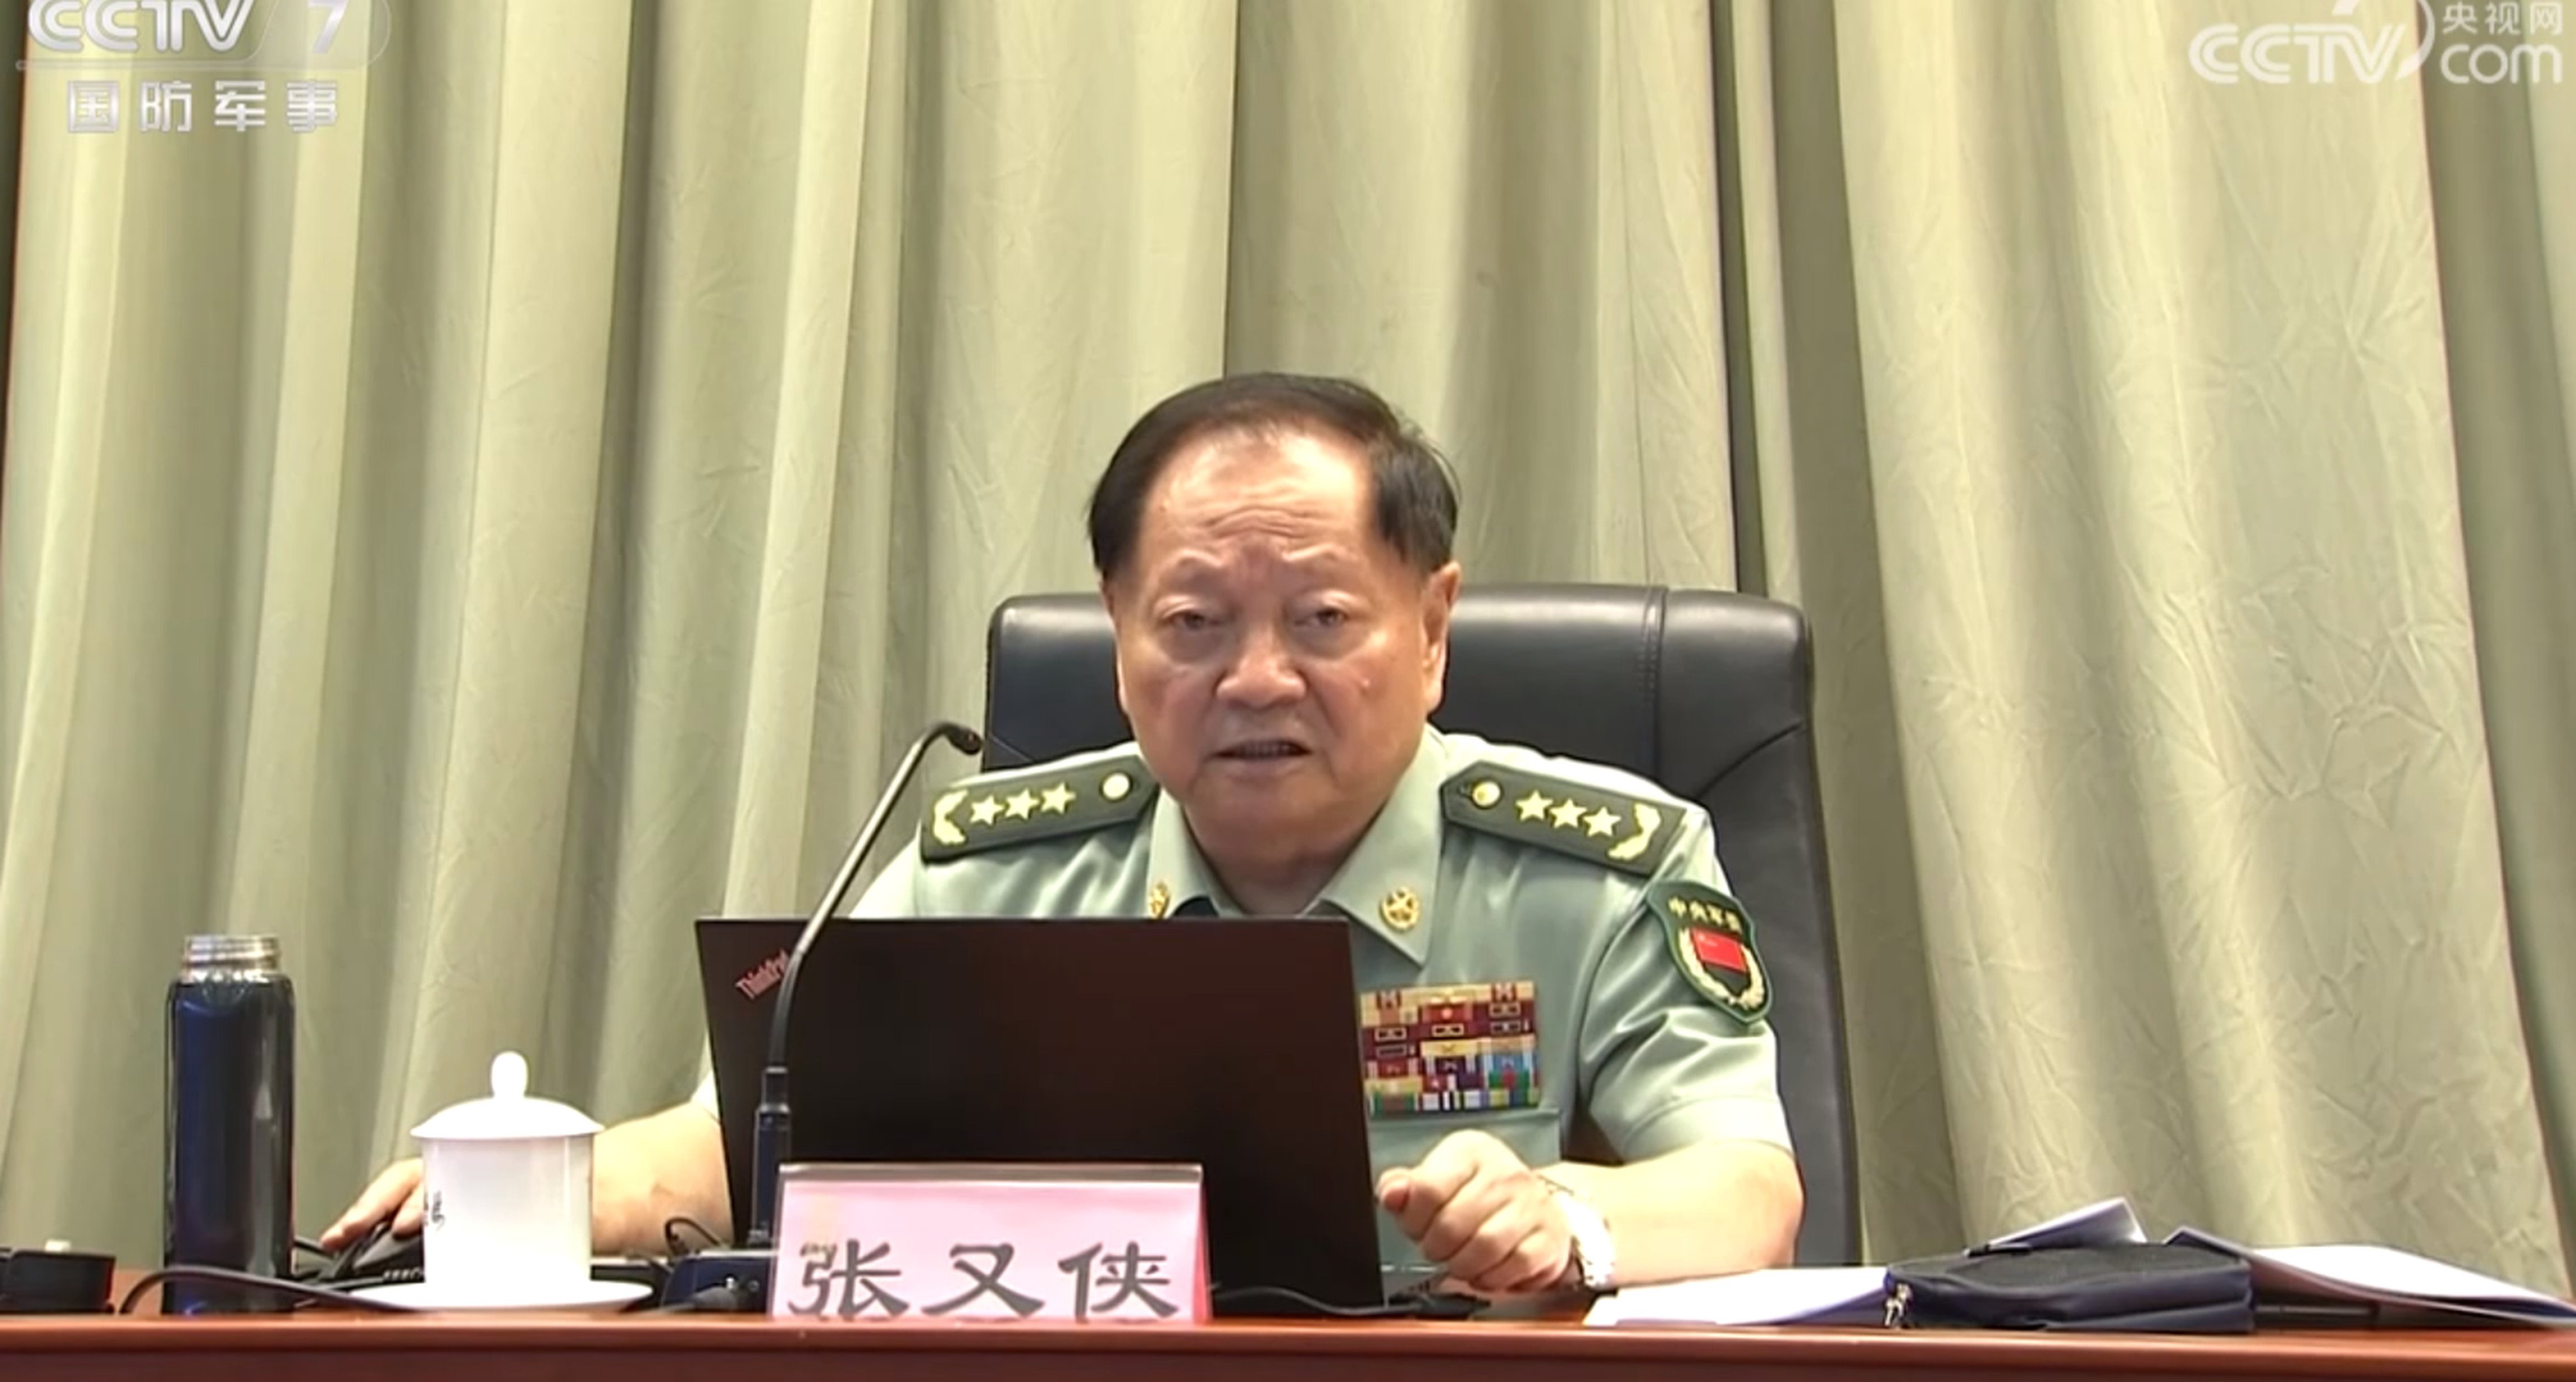 General Zhang Youxia, first vice-chairman of the PLA’s Central Military Commission, addresses a weapons and equipment meeting in Beijing. Source: CCTV